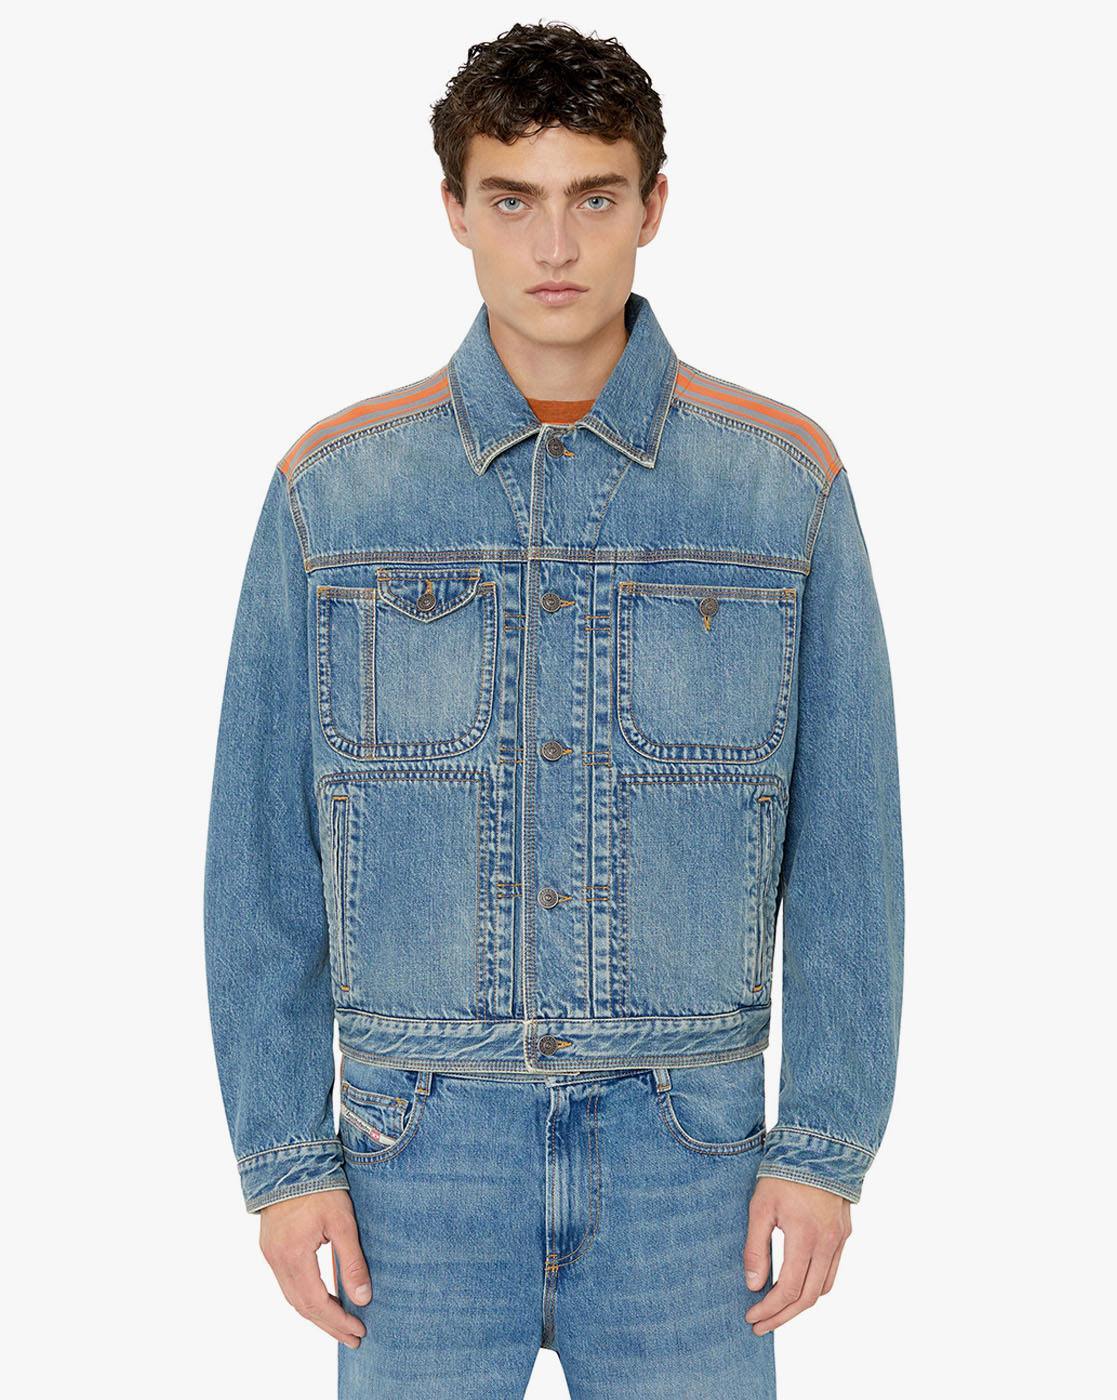 Acne Studios - Oversized Fit Denim Jacket | HBX - Globally Curated Fashion  and Lifestyle by Hypebeast